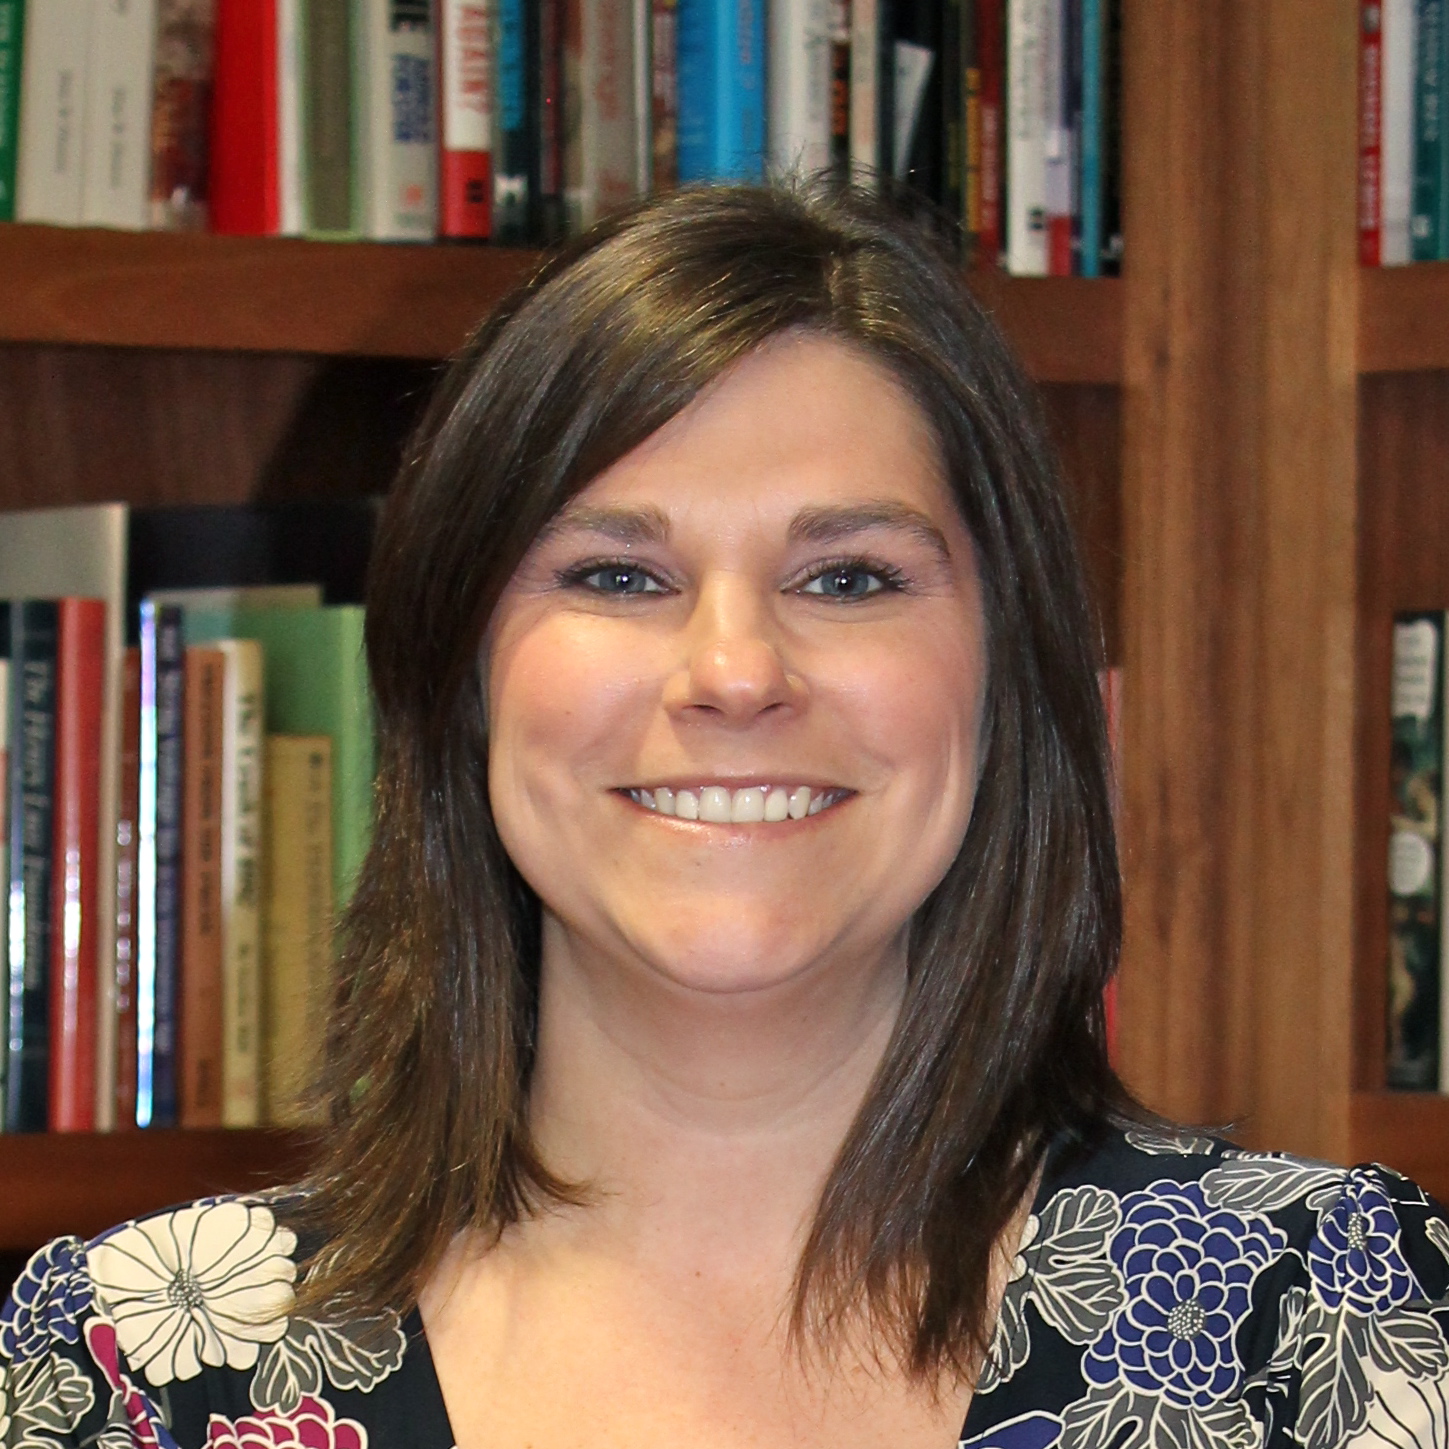 McConnell Center welcomes Freels to staff